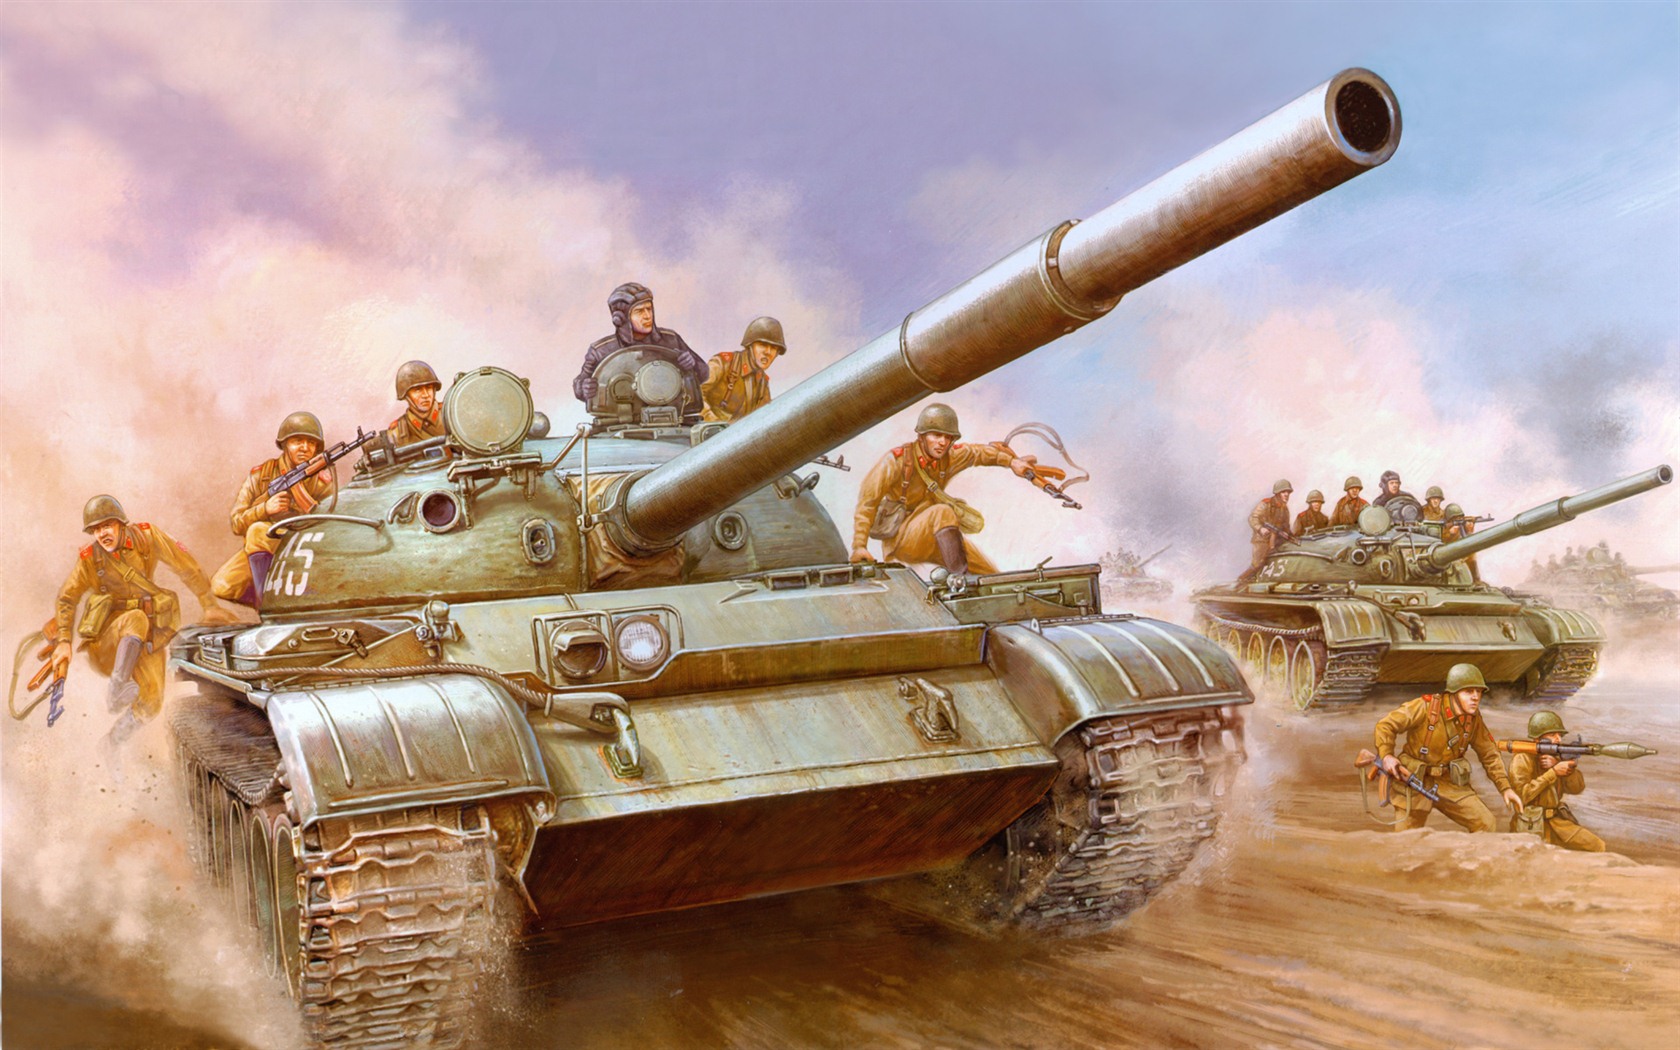 Military tanks, armored HD painting wallpapers #16 - 1680x1050